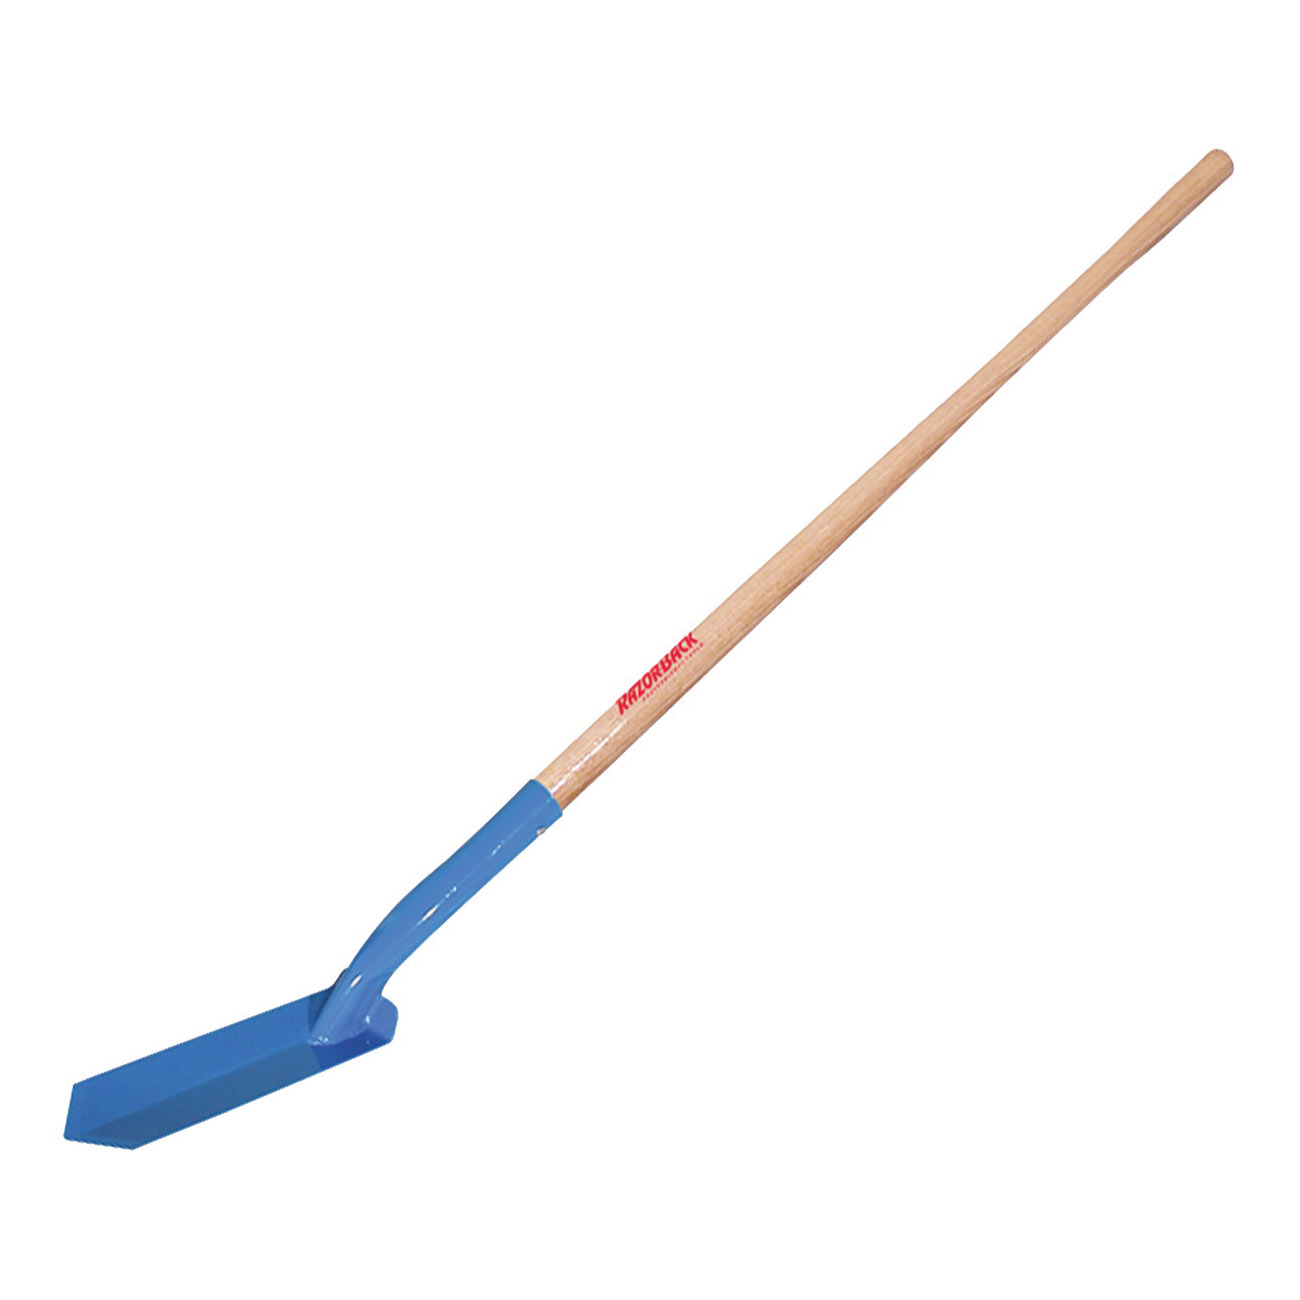 47023 Trenching Shovel, 3 in W Blade, Steel Blade, Hardwood Handle, Extra Long Handle, 48 in L Handle